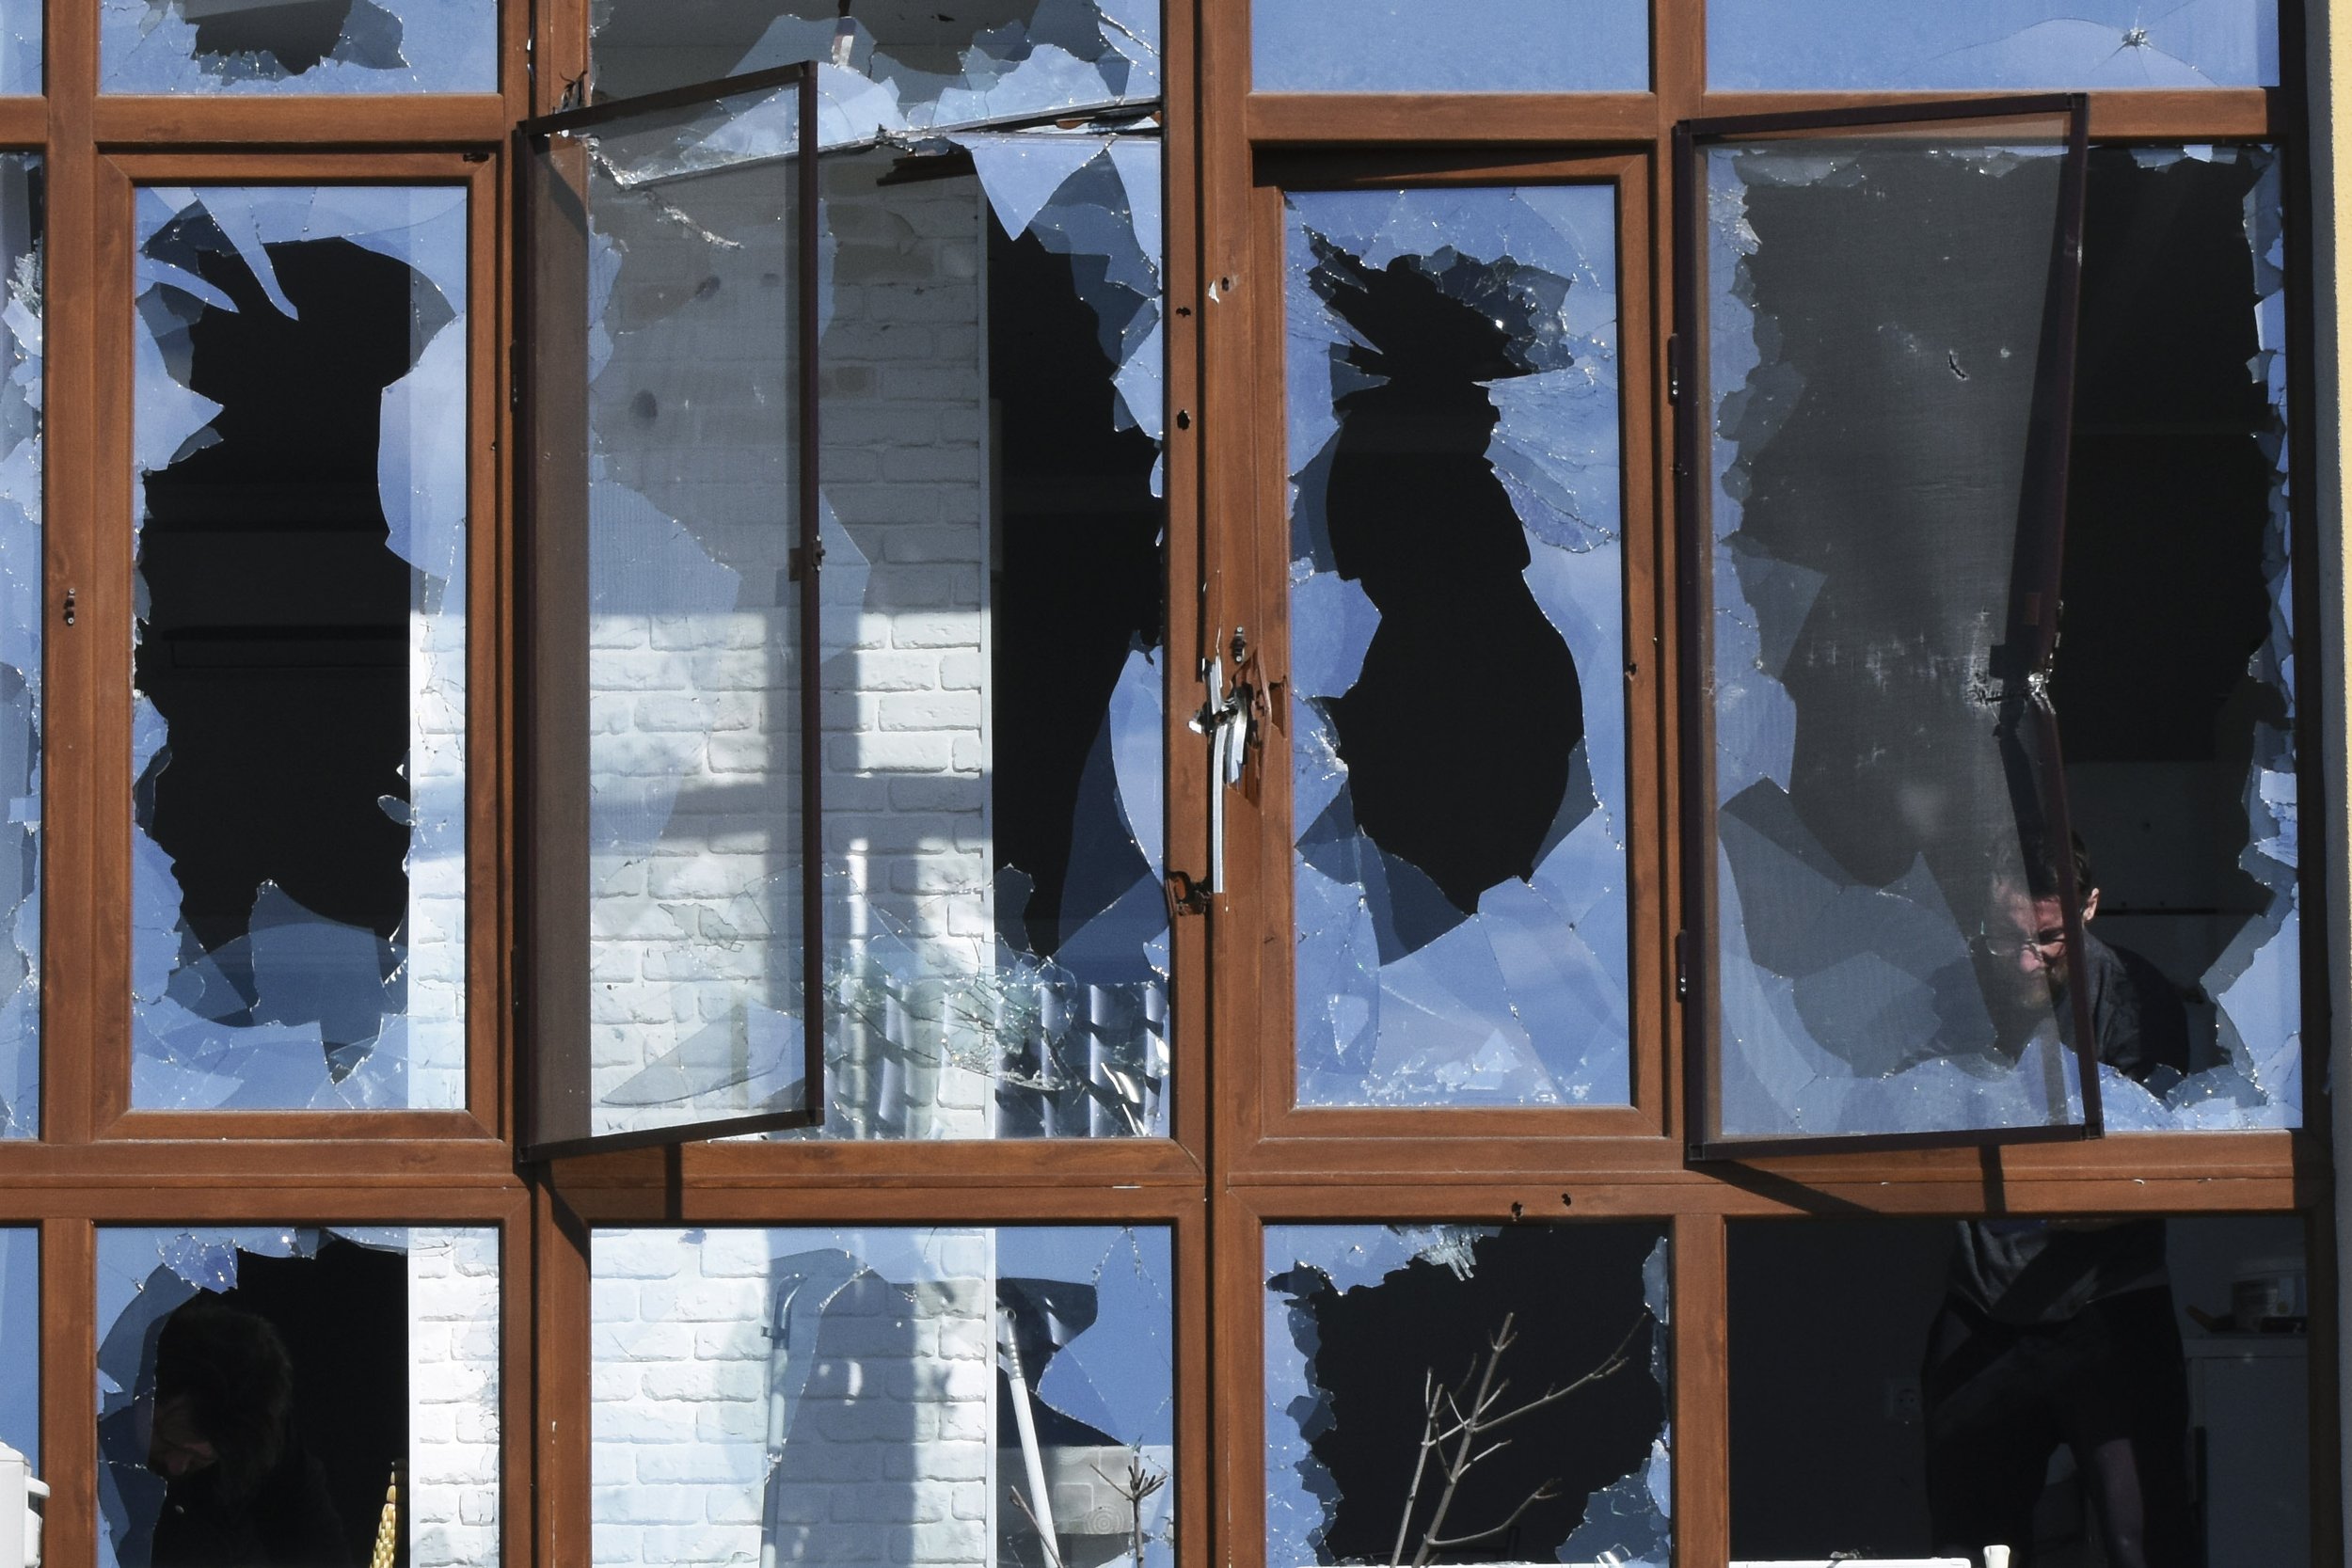  A man appears through shattered windows of a building after a shelling in Odesa, Ukraine, Monday, March 21, 2022. (AP Photo/Max Pshybyshevsky) 